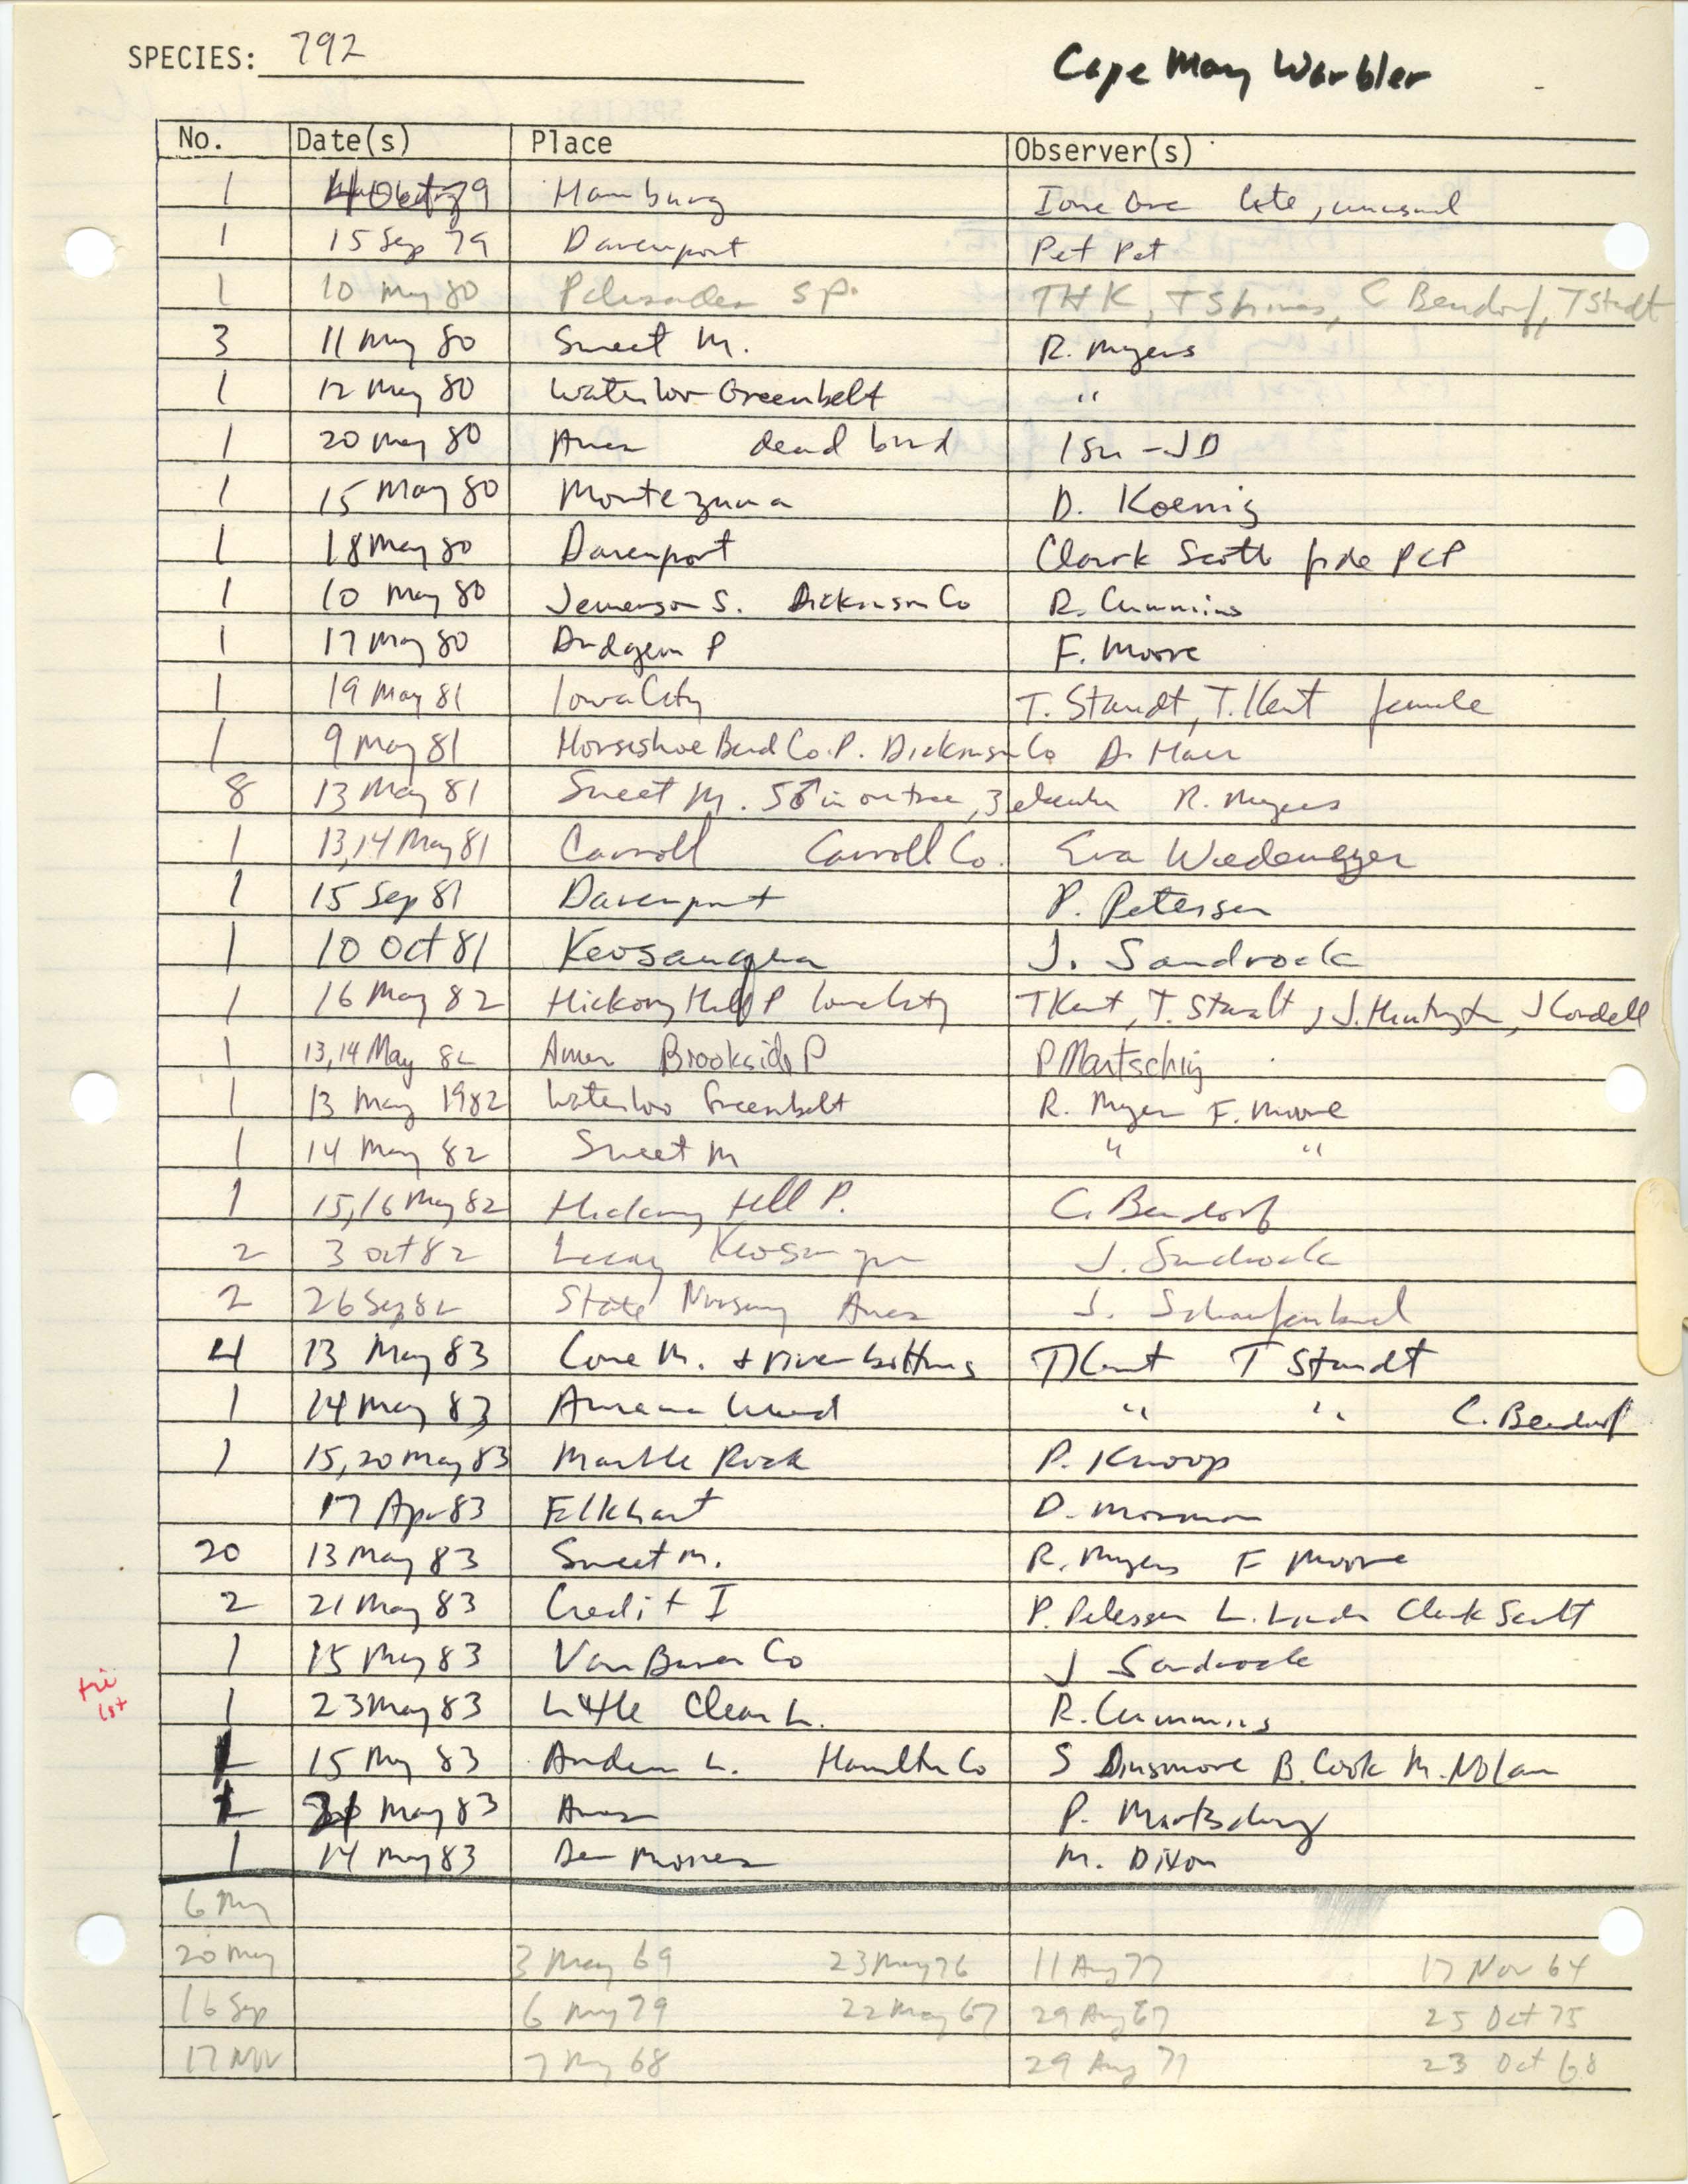 Iowa Ornithologists' Union, field report compiled data, Cape May Warbler, 1979-1983